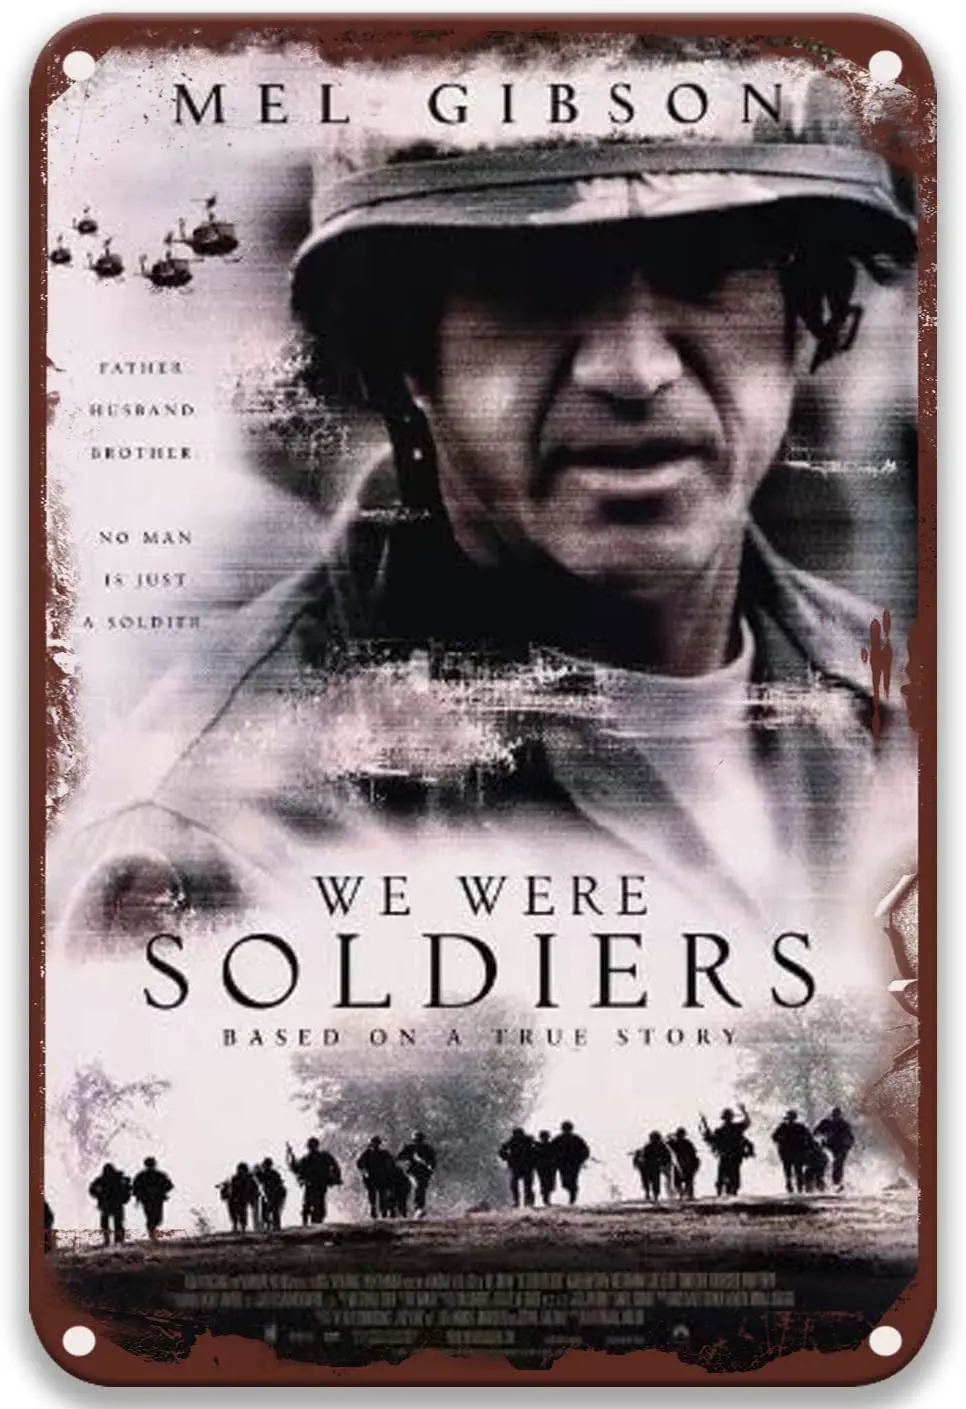 

sfasf StyleWe were Soldiers Tin Signs Vintage Movies Poster Art Group for Wall Art Party Kitchen Decor Bathroom 8x12 Inches